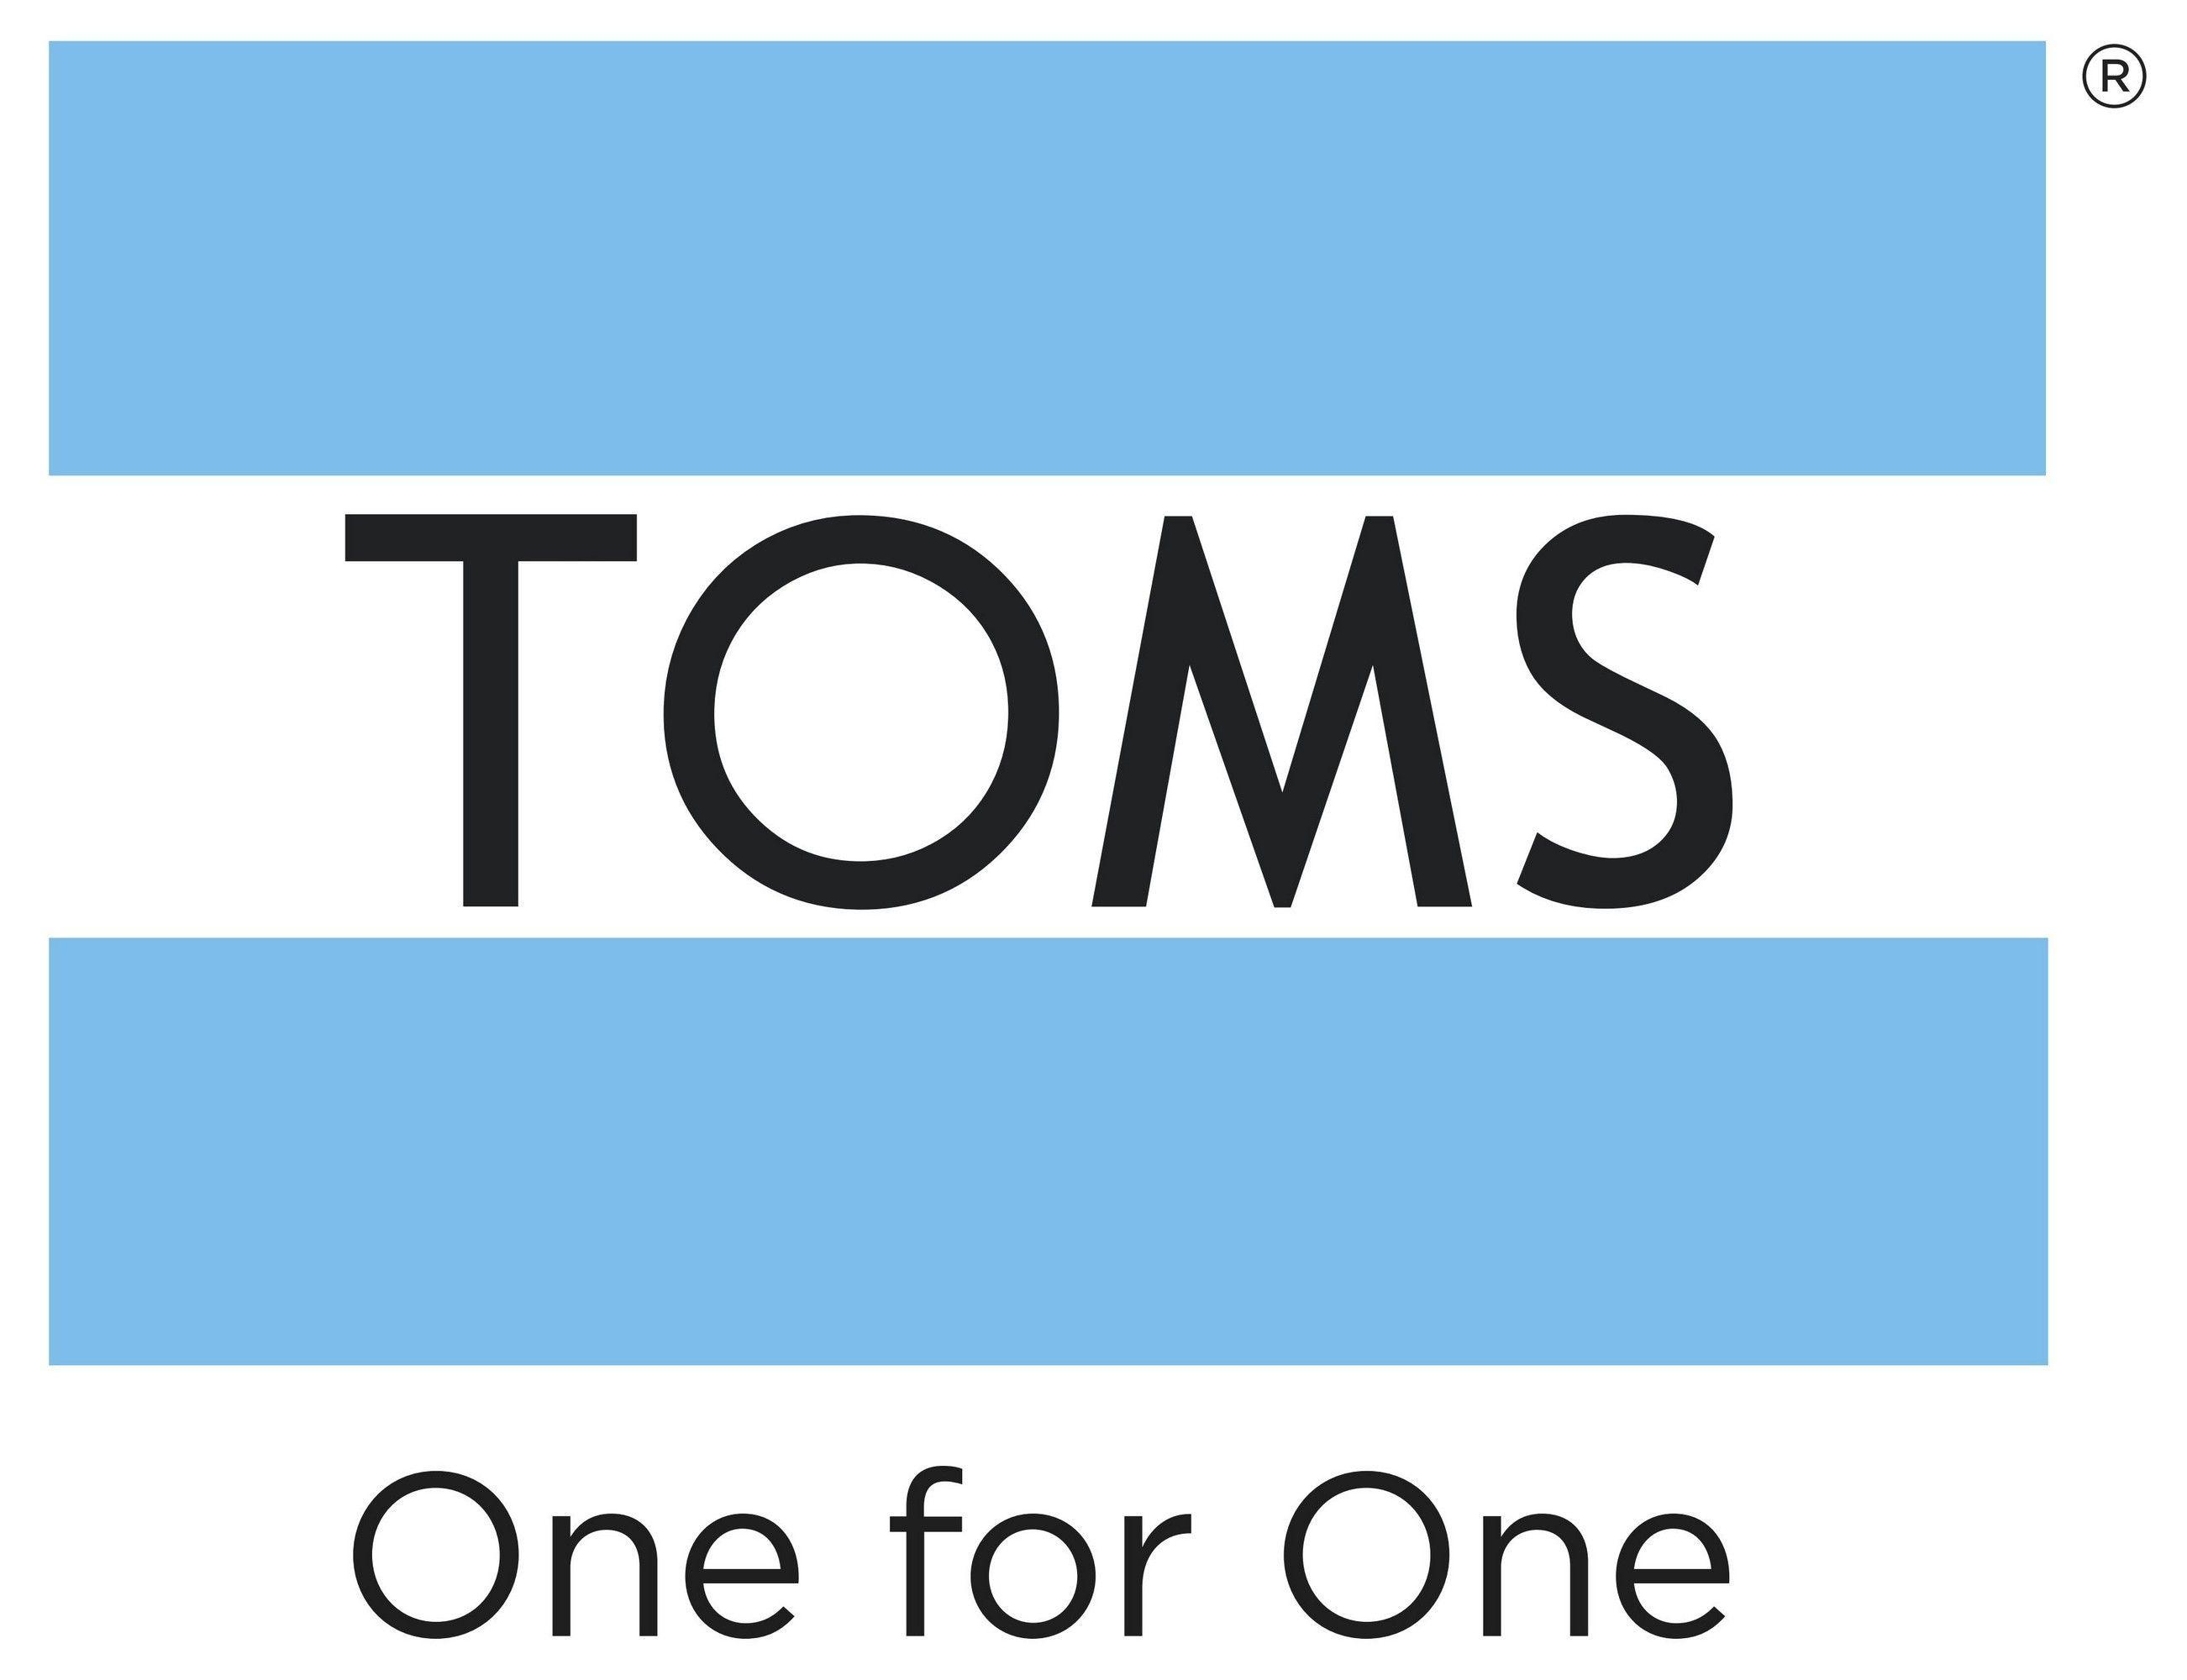 Most Popular Shoe Brands Logo - Saving on TOMS Brand Shoes and Accessories | Brand Savings ...